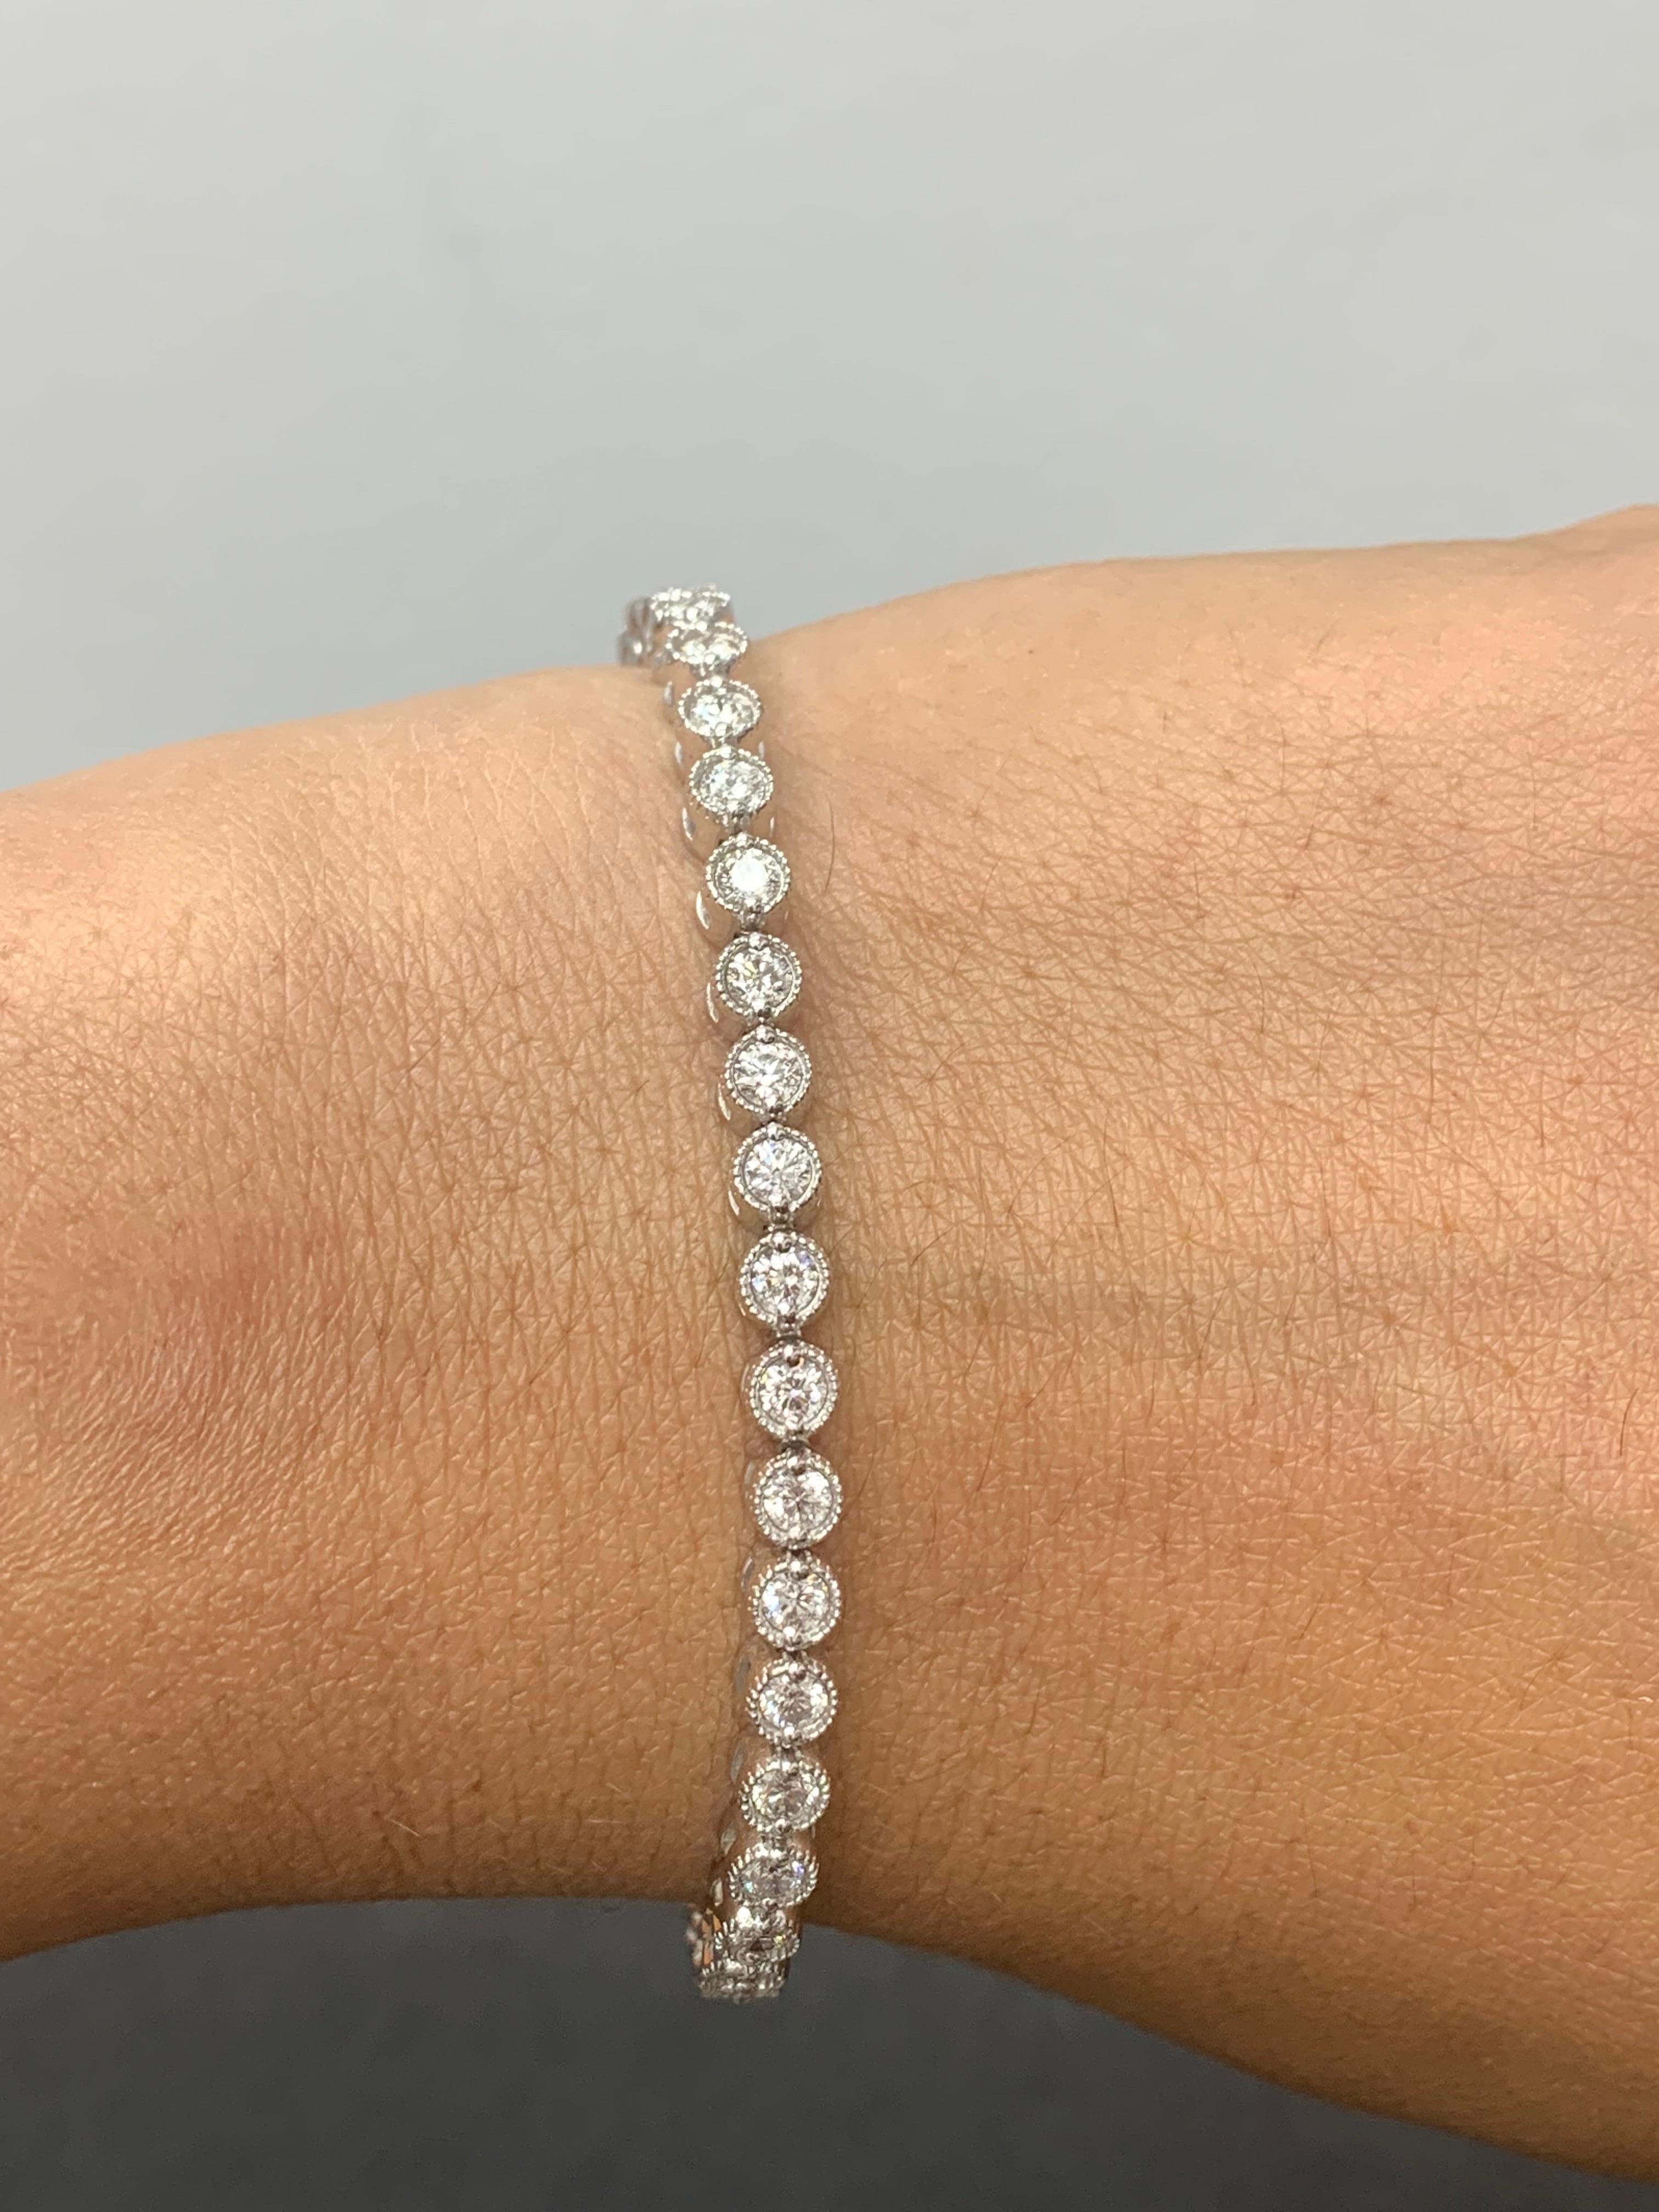 A versatile and timeless tennis bracelet showcasing a row of round brilliant diamonds weighing 3.02 carats total, set in 14k white gold. 

All diamonds are GH color SI1 Clarity.
Available in Yellow and Rose as well.
Style available in different